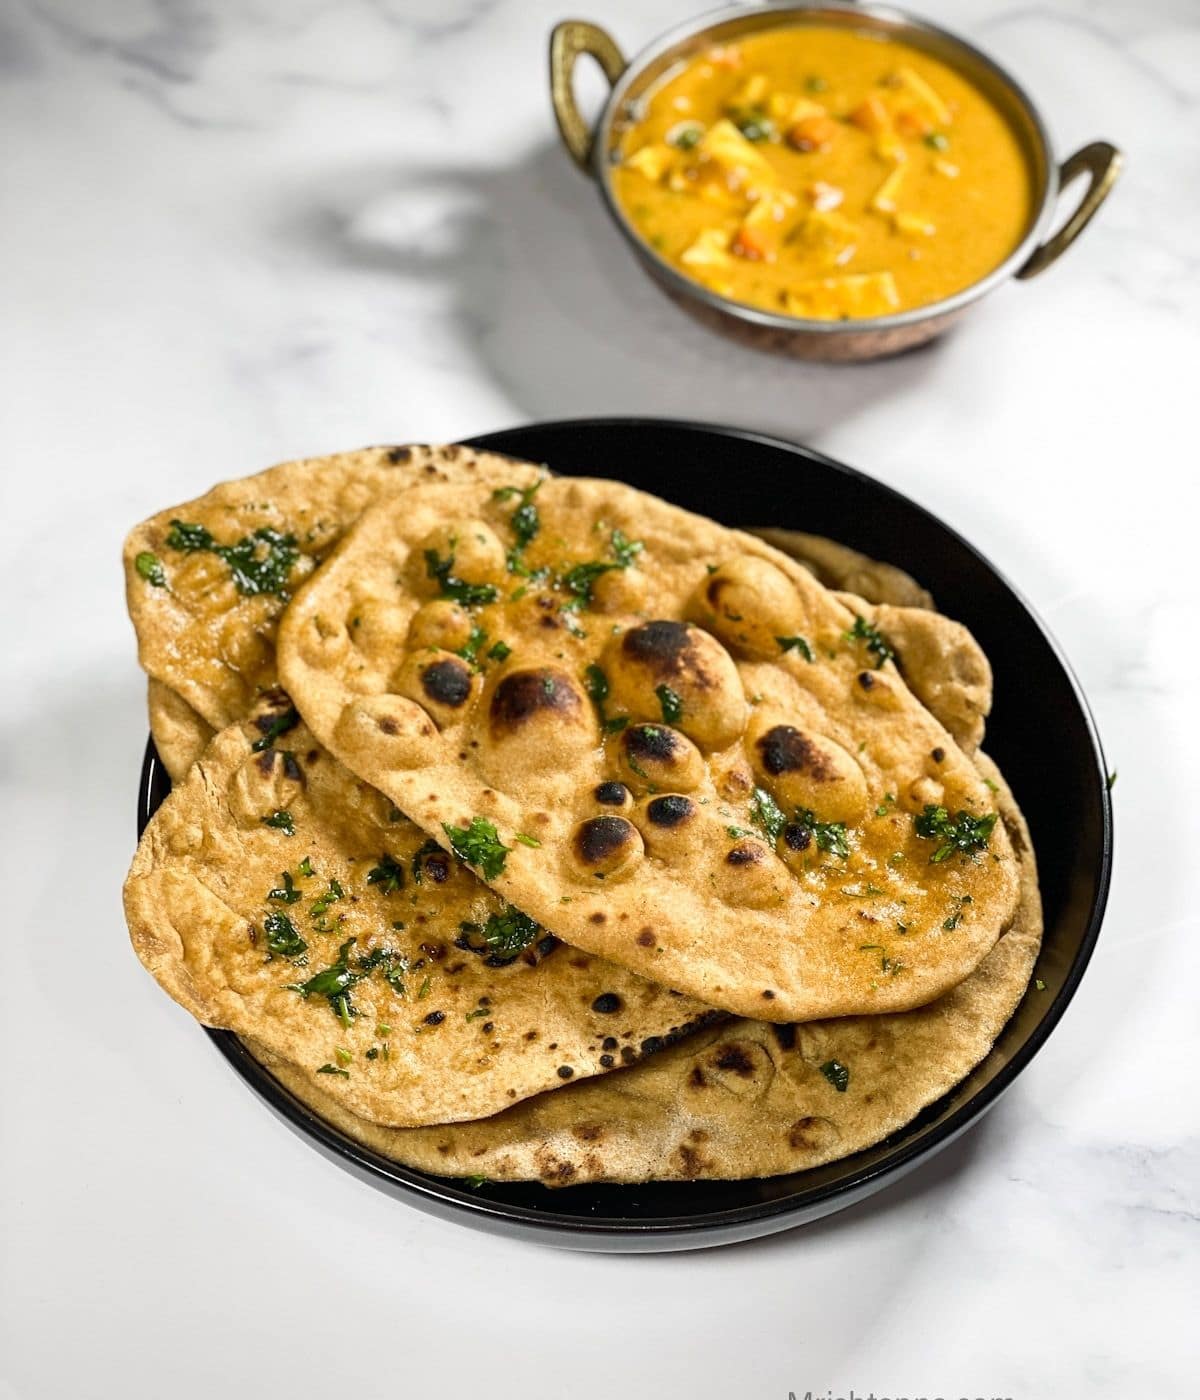 A plate of wheat naan are on the table.